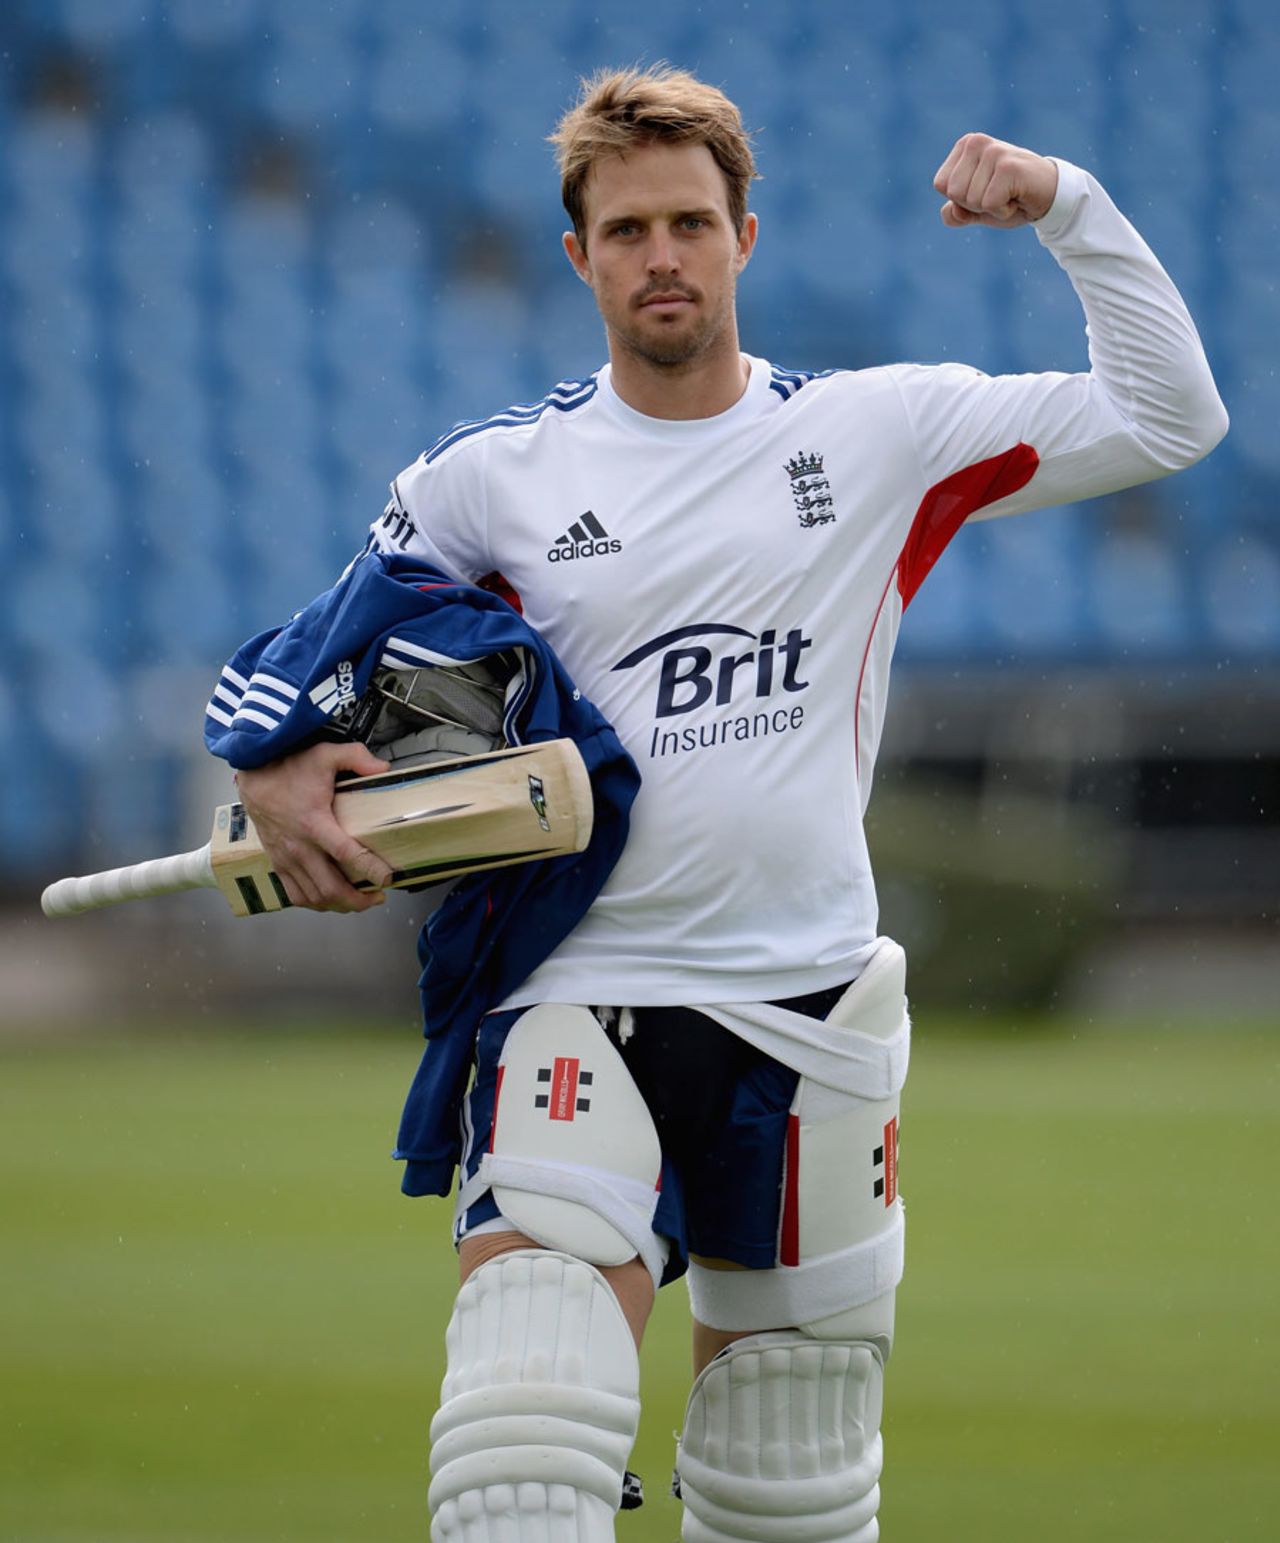 Nick Compton strikes a pose after a net session, England v New Zealand, 2nd Investec Test, Headingley, May 23, 2013